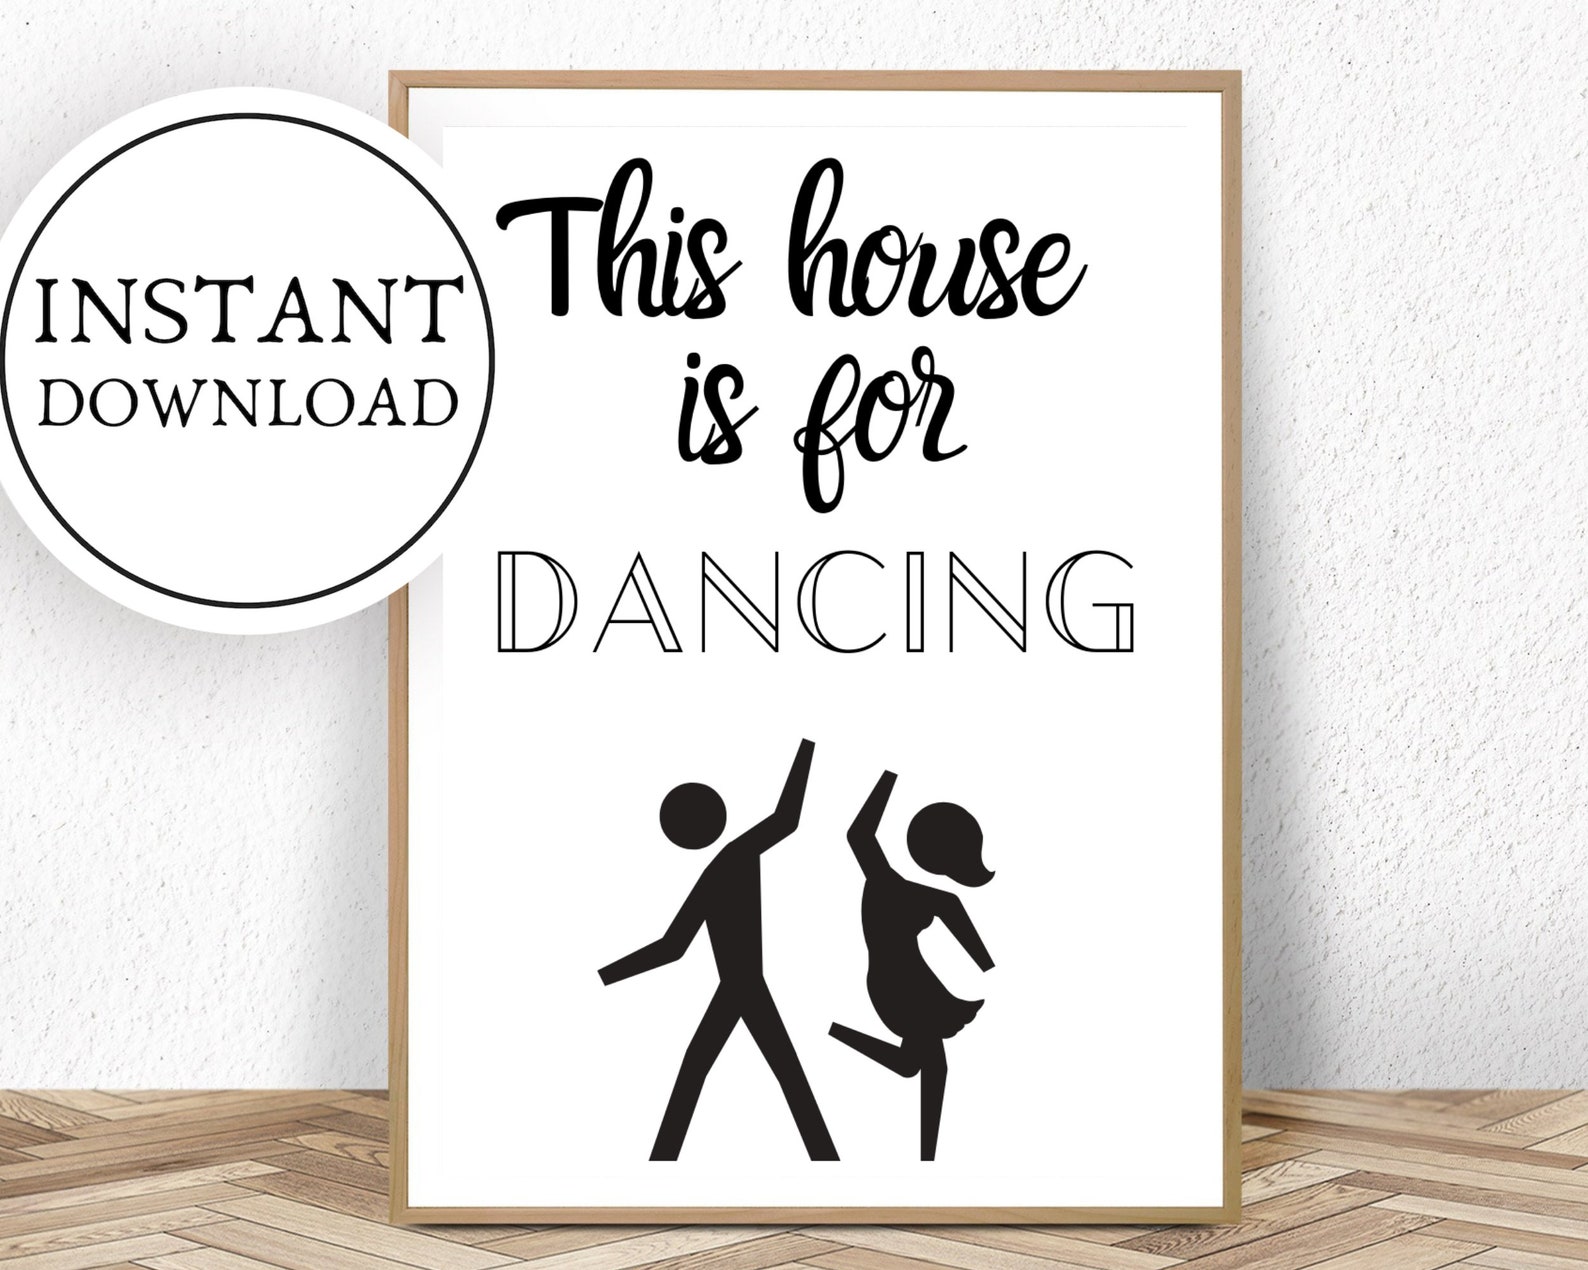 This is house it s number two. This Kitchen is for Dancing Постер. This Kitchen is for Dancing Постер с дискошаром. Lineone Dance принт. Last Dance Print.